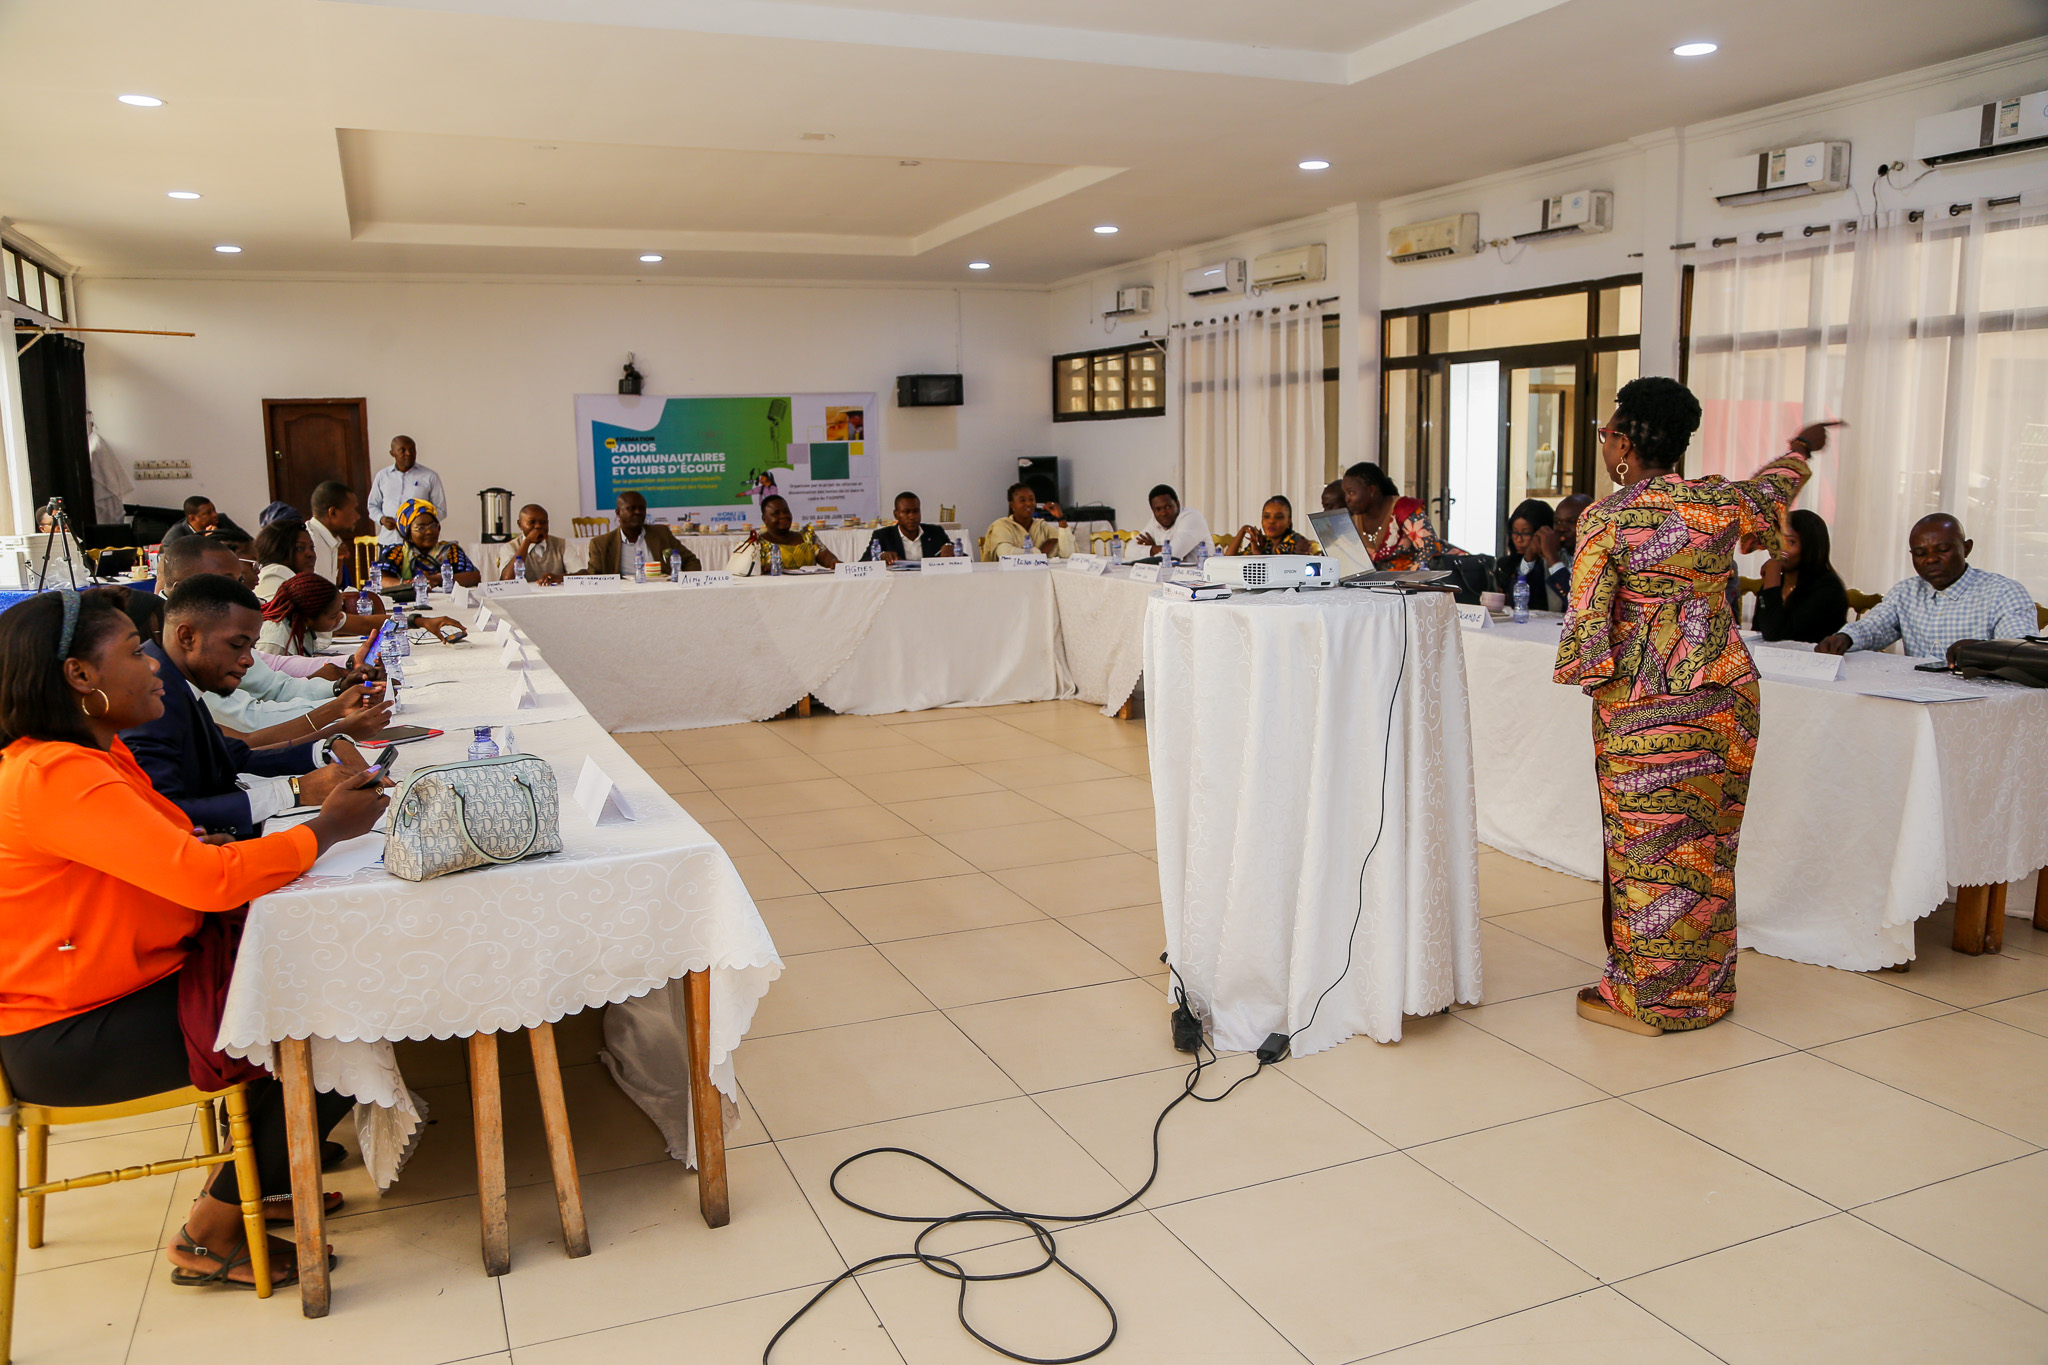 First day of the workshop in Kinshasa. The participants reinforce their knowledge on gender equality terms. Photo: UN Women / Marina Mestres Segarra.